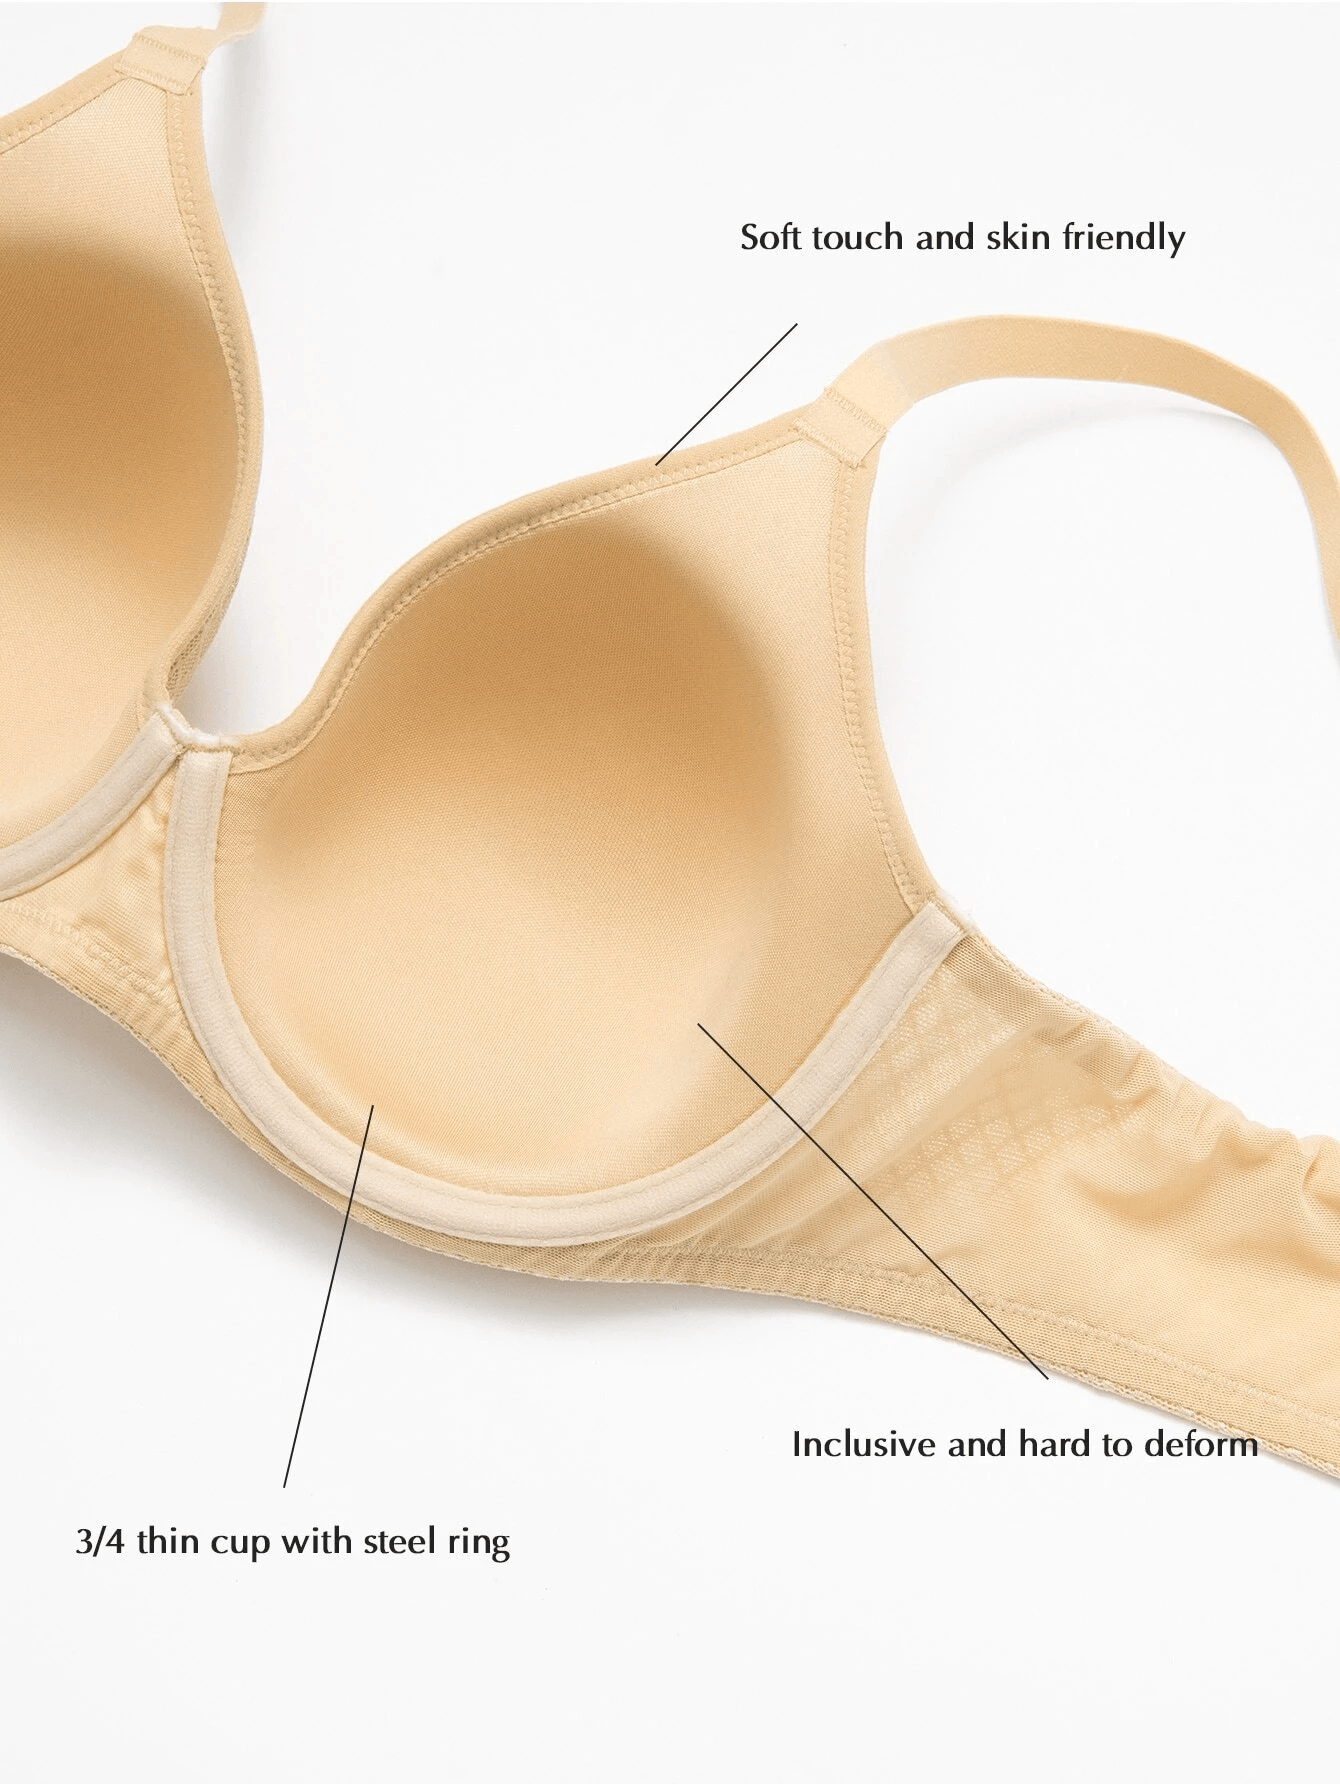 No Steel Ring Thin Cup Bra For Large Breasts, Push Up And Prevent